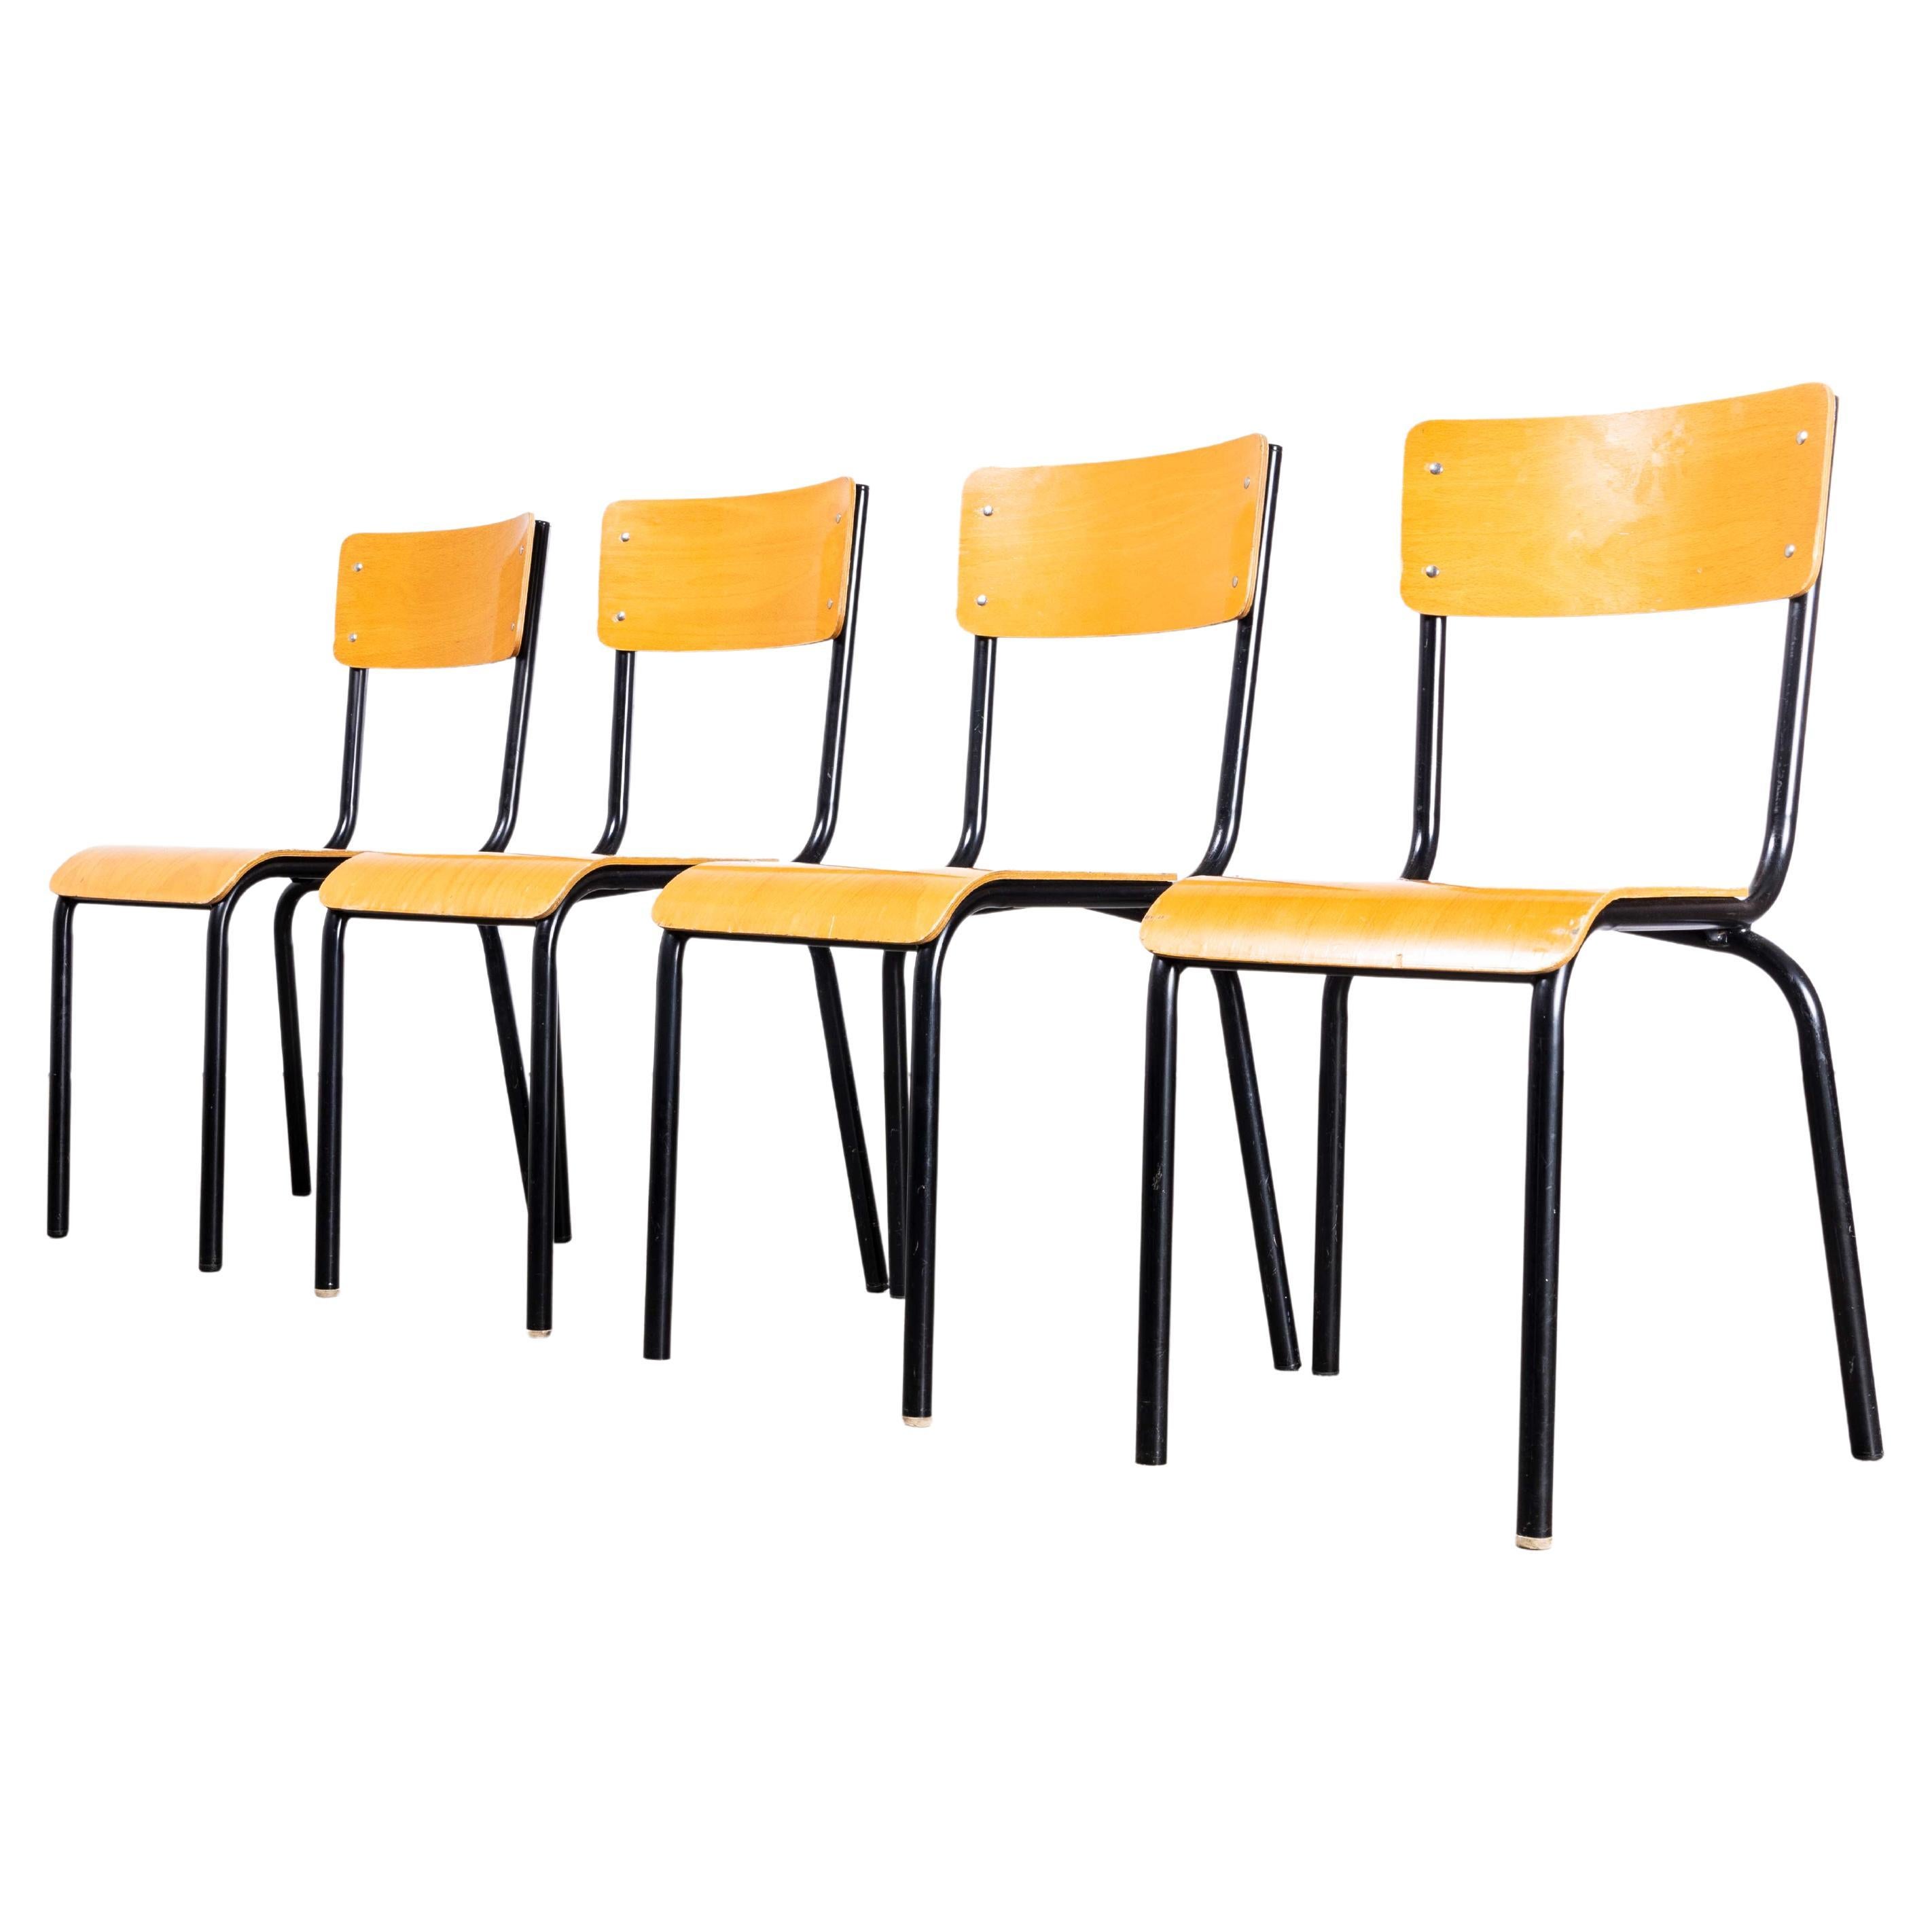 1960’s Original Black French Stacking University Chairs Wide Back - Set Of Four